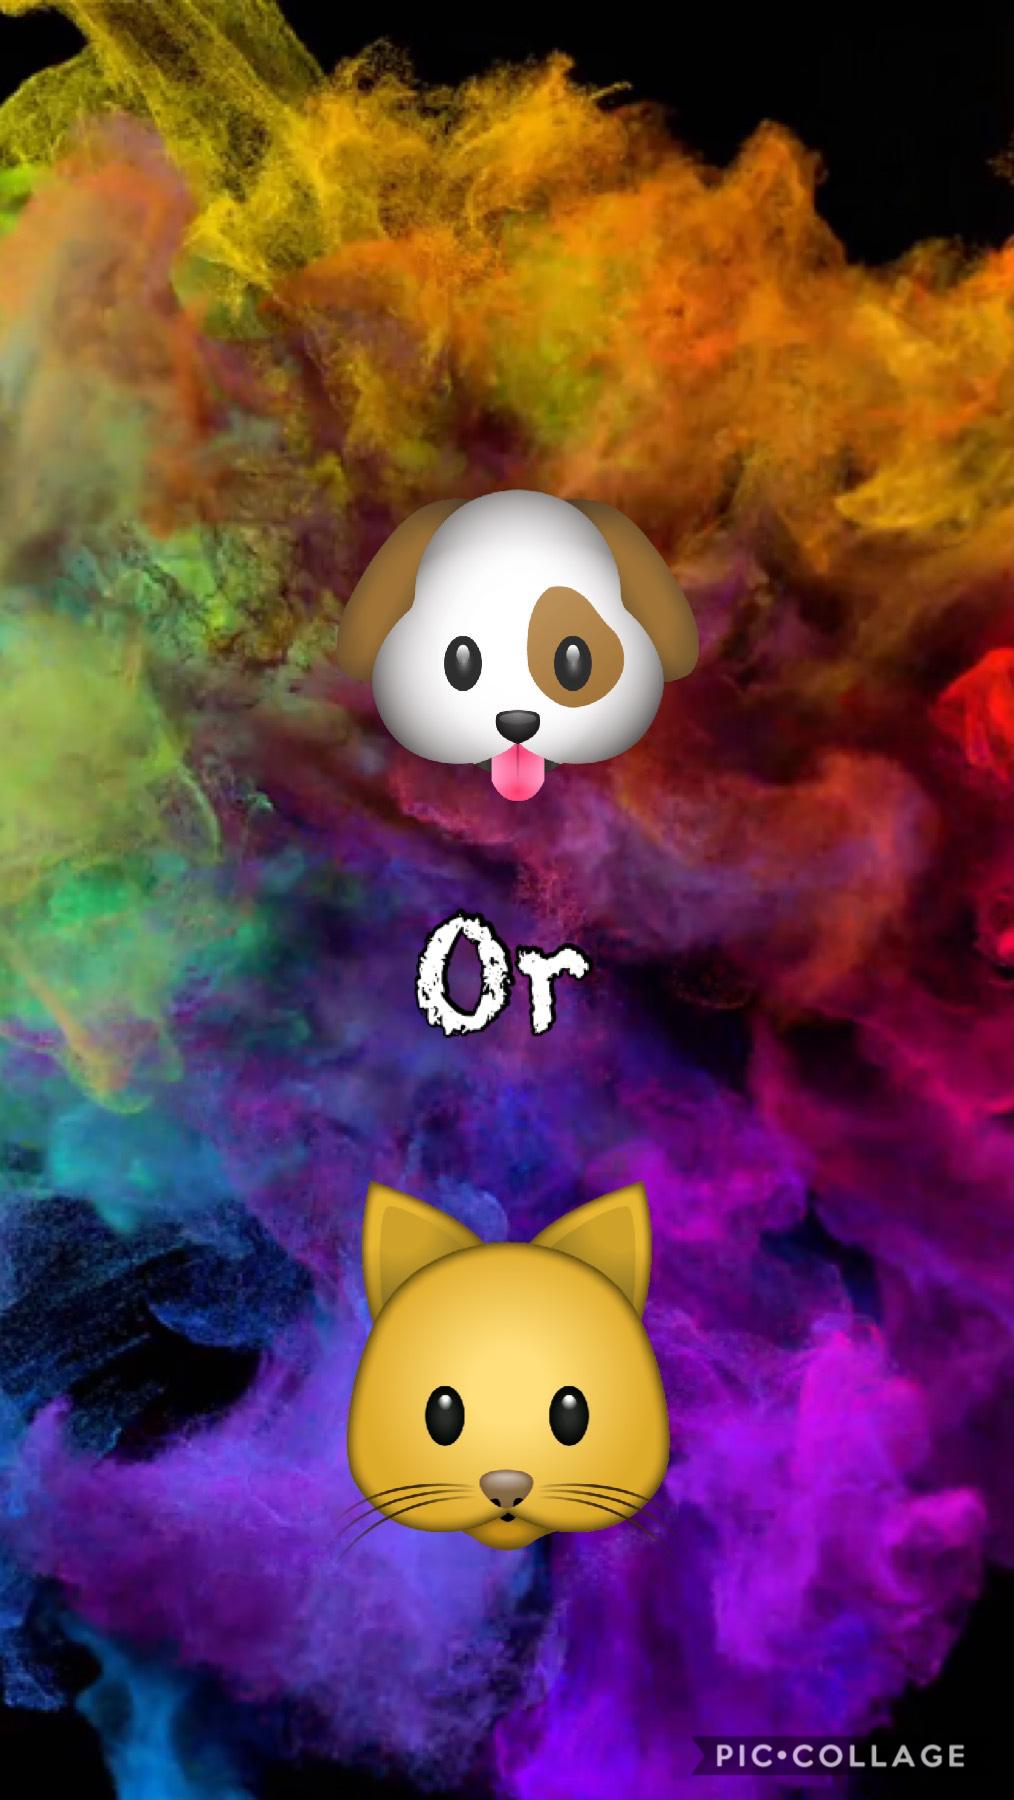 Like if ya love cats 😻😻😻
Comment if mad about dogs 🐶 